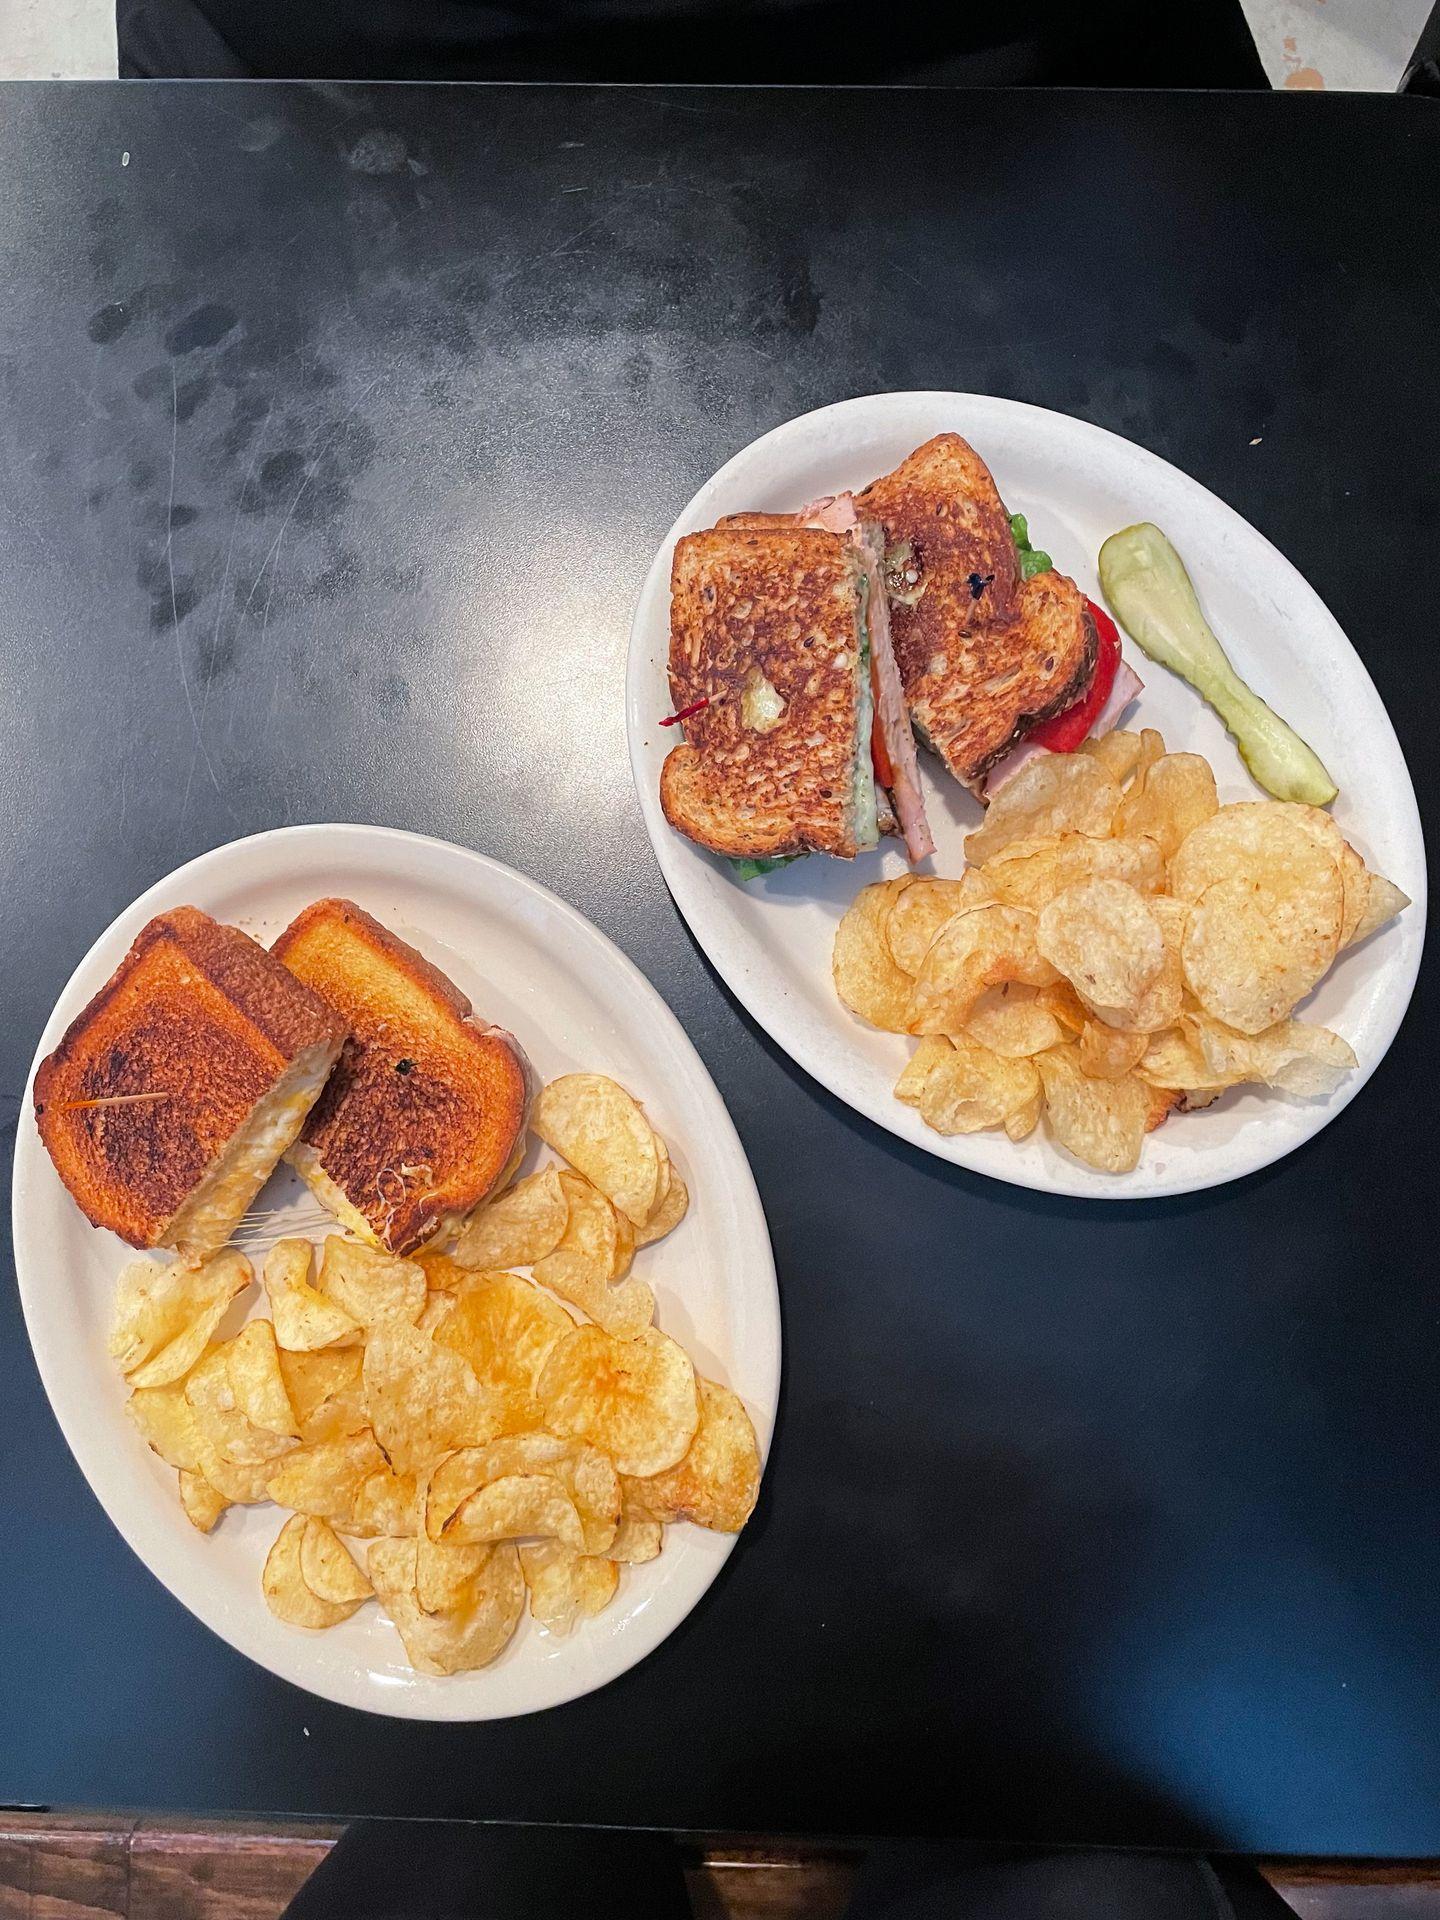 Two plates on sandwiches and chips from Lucy's Cafe